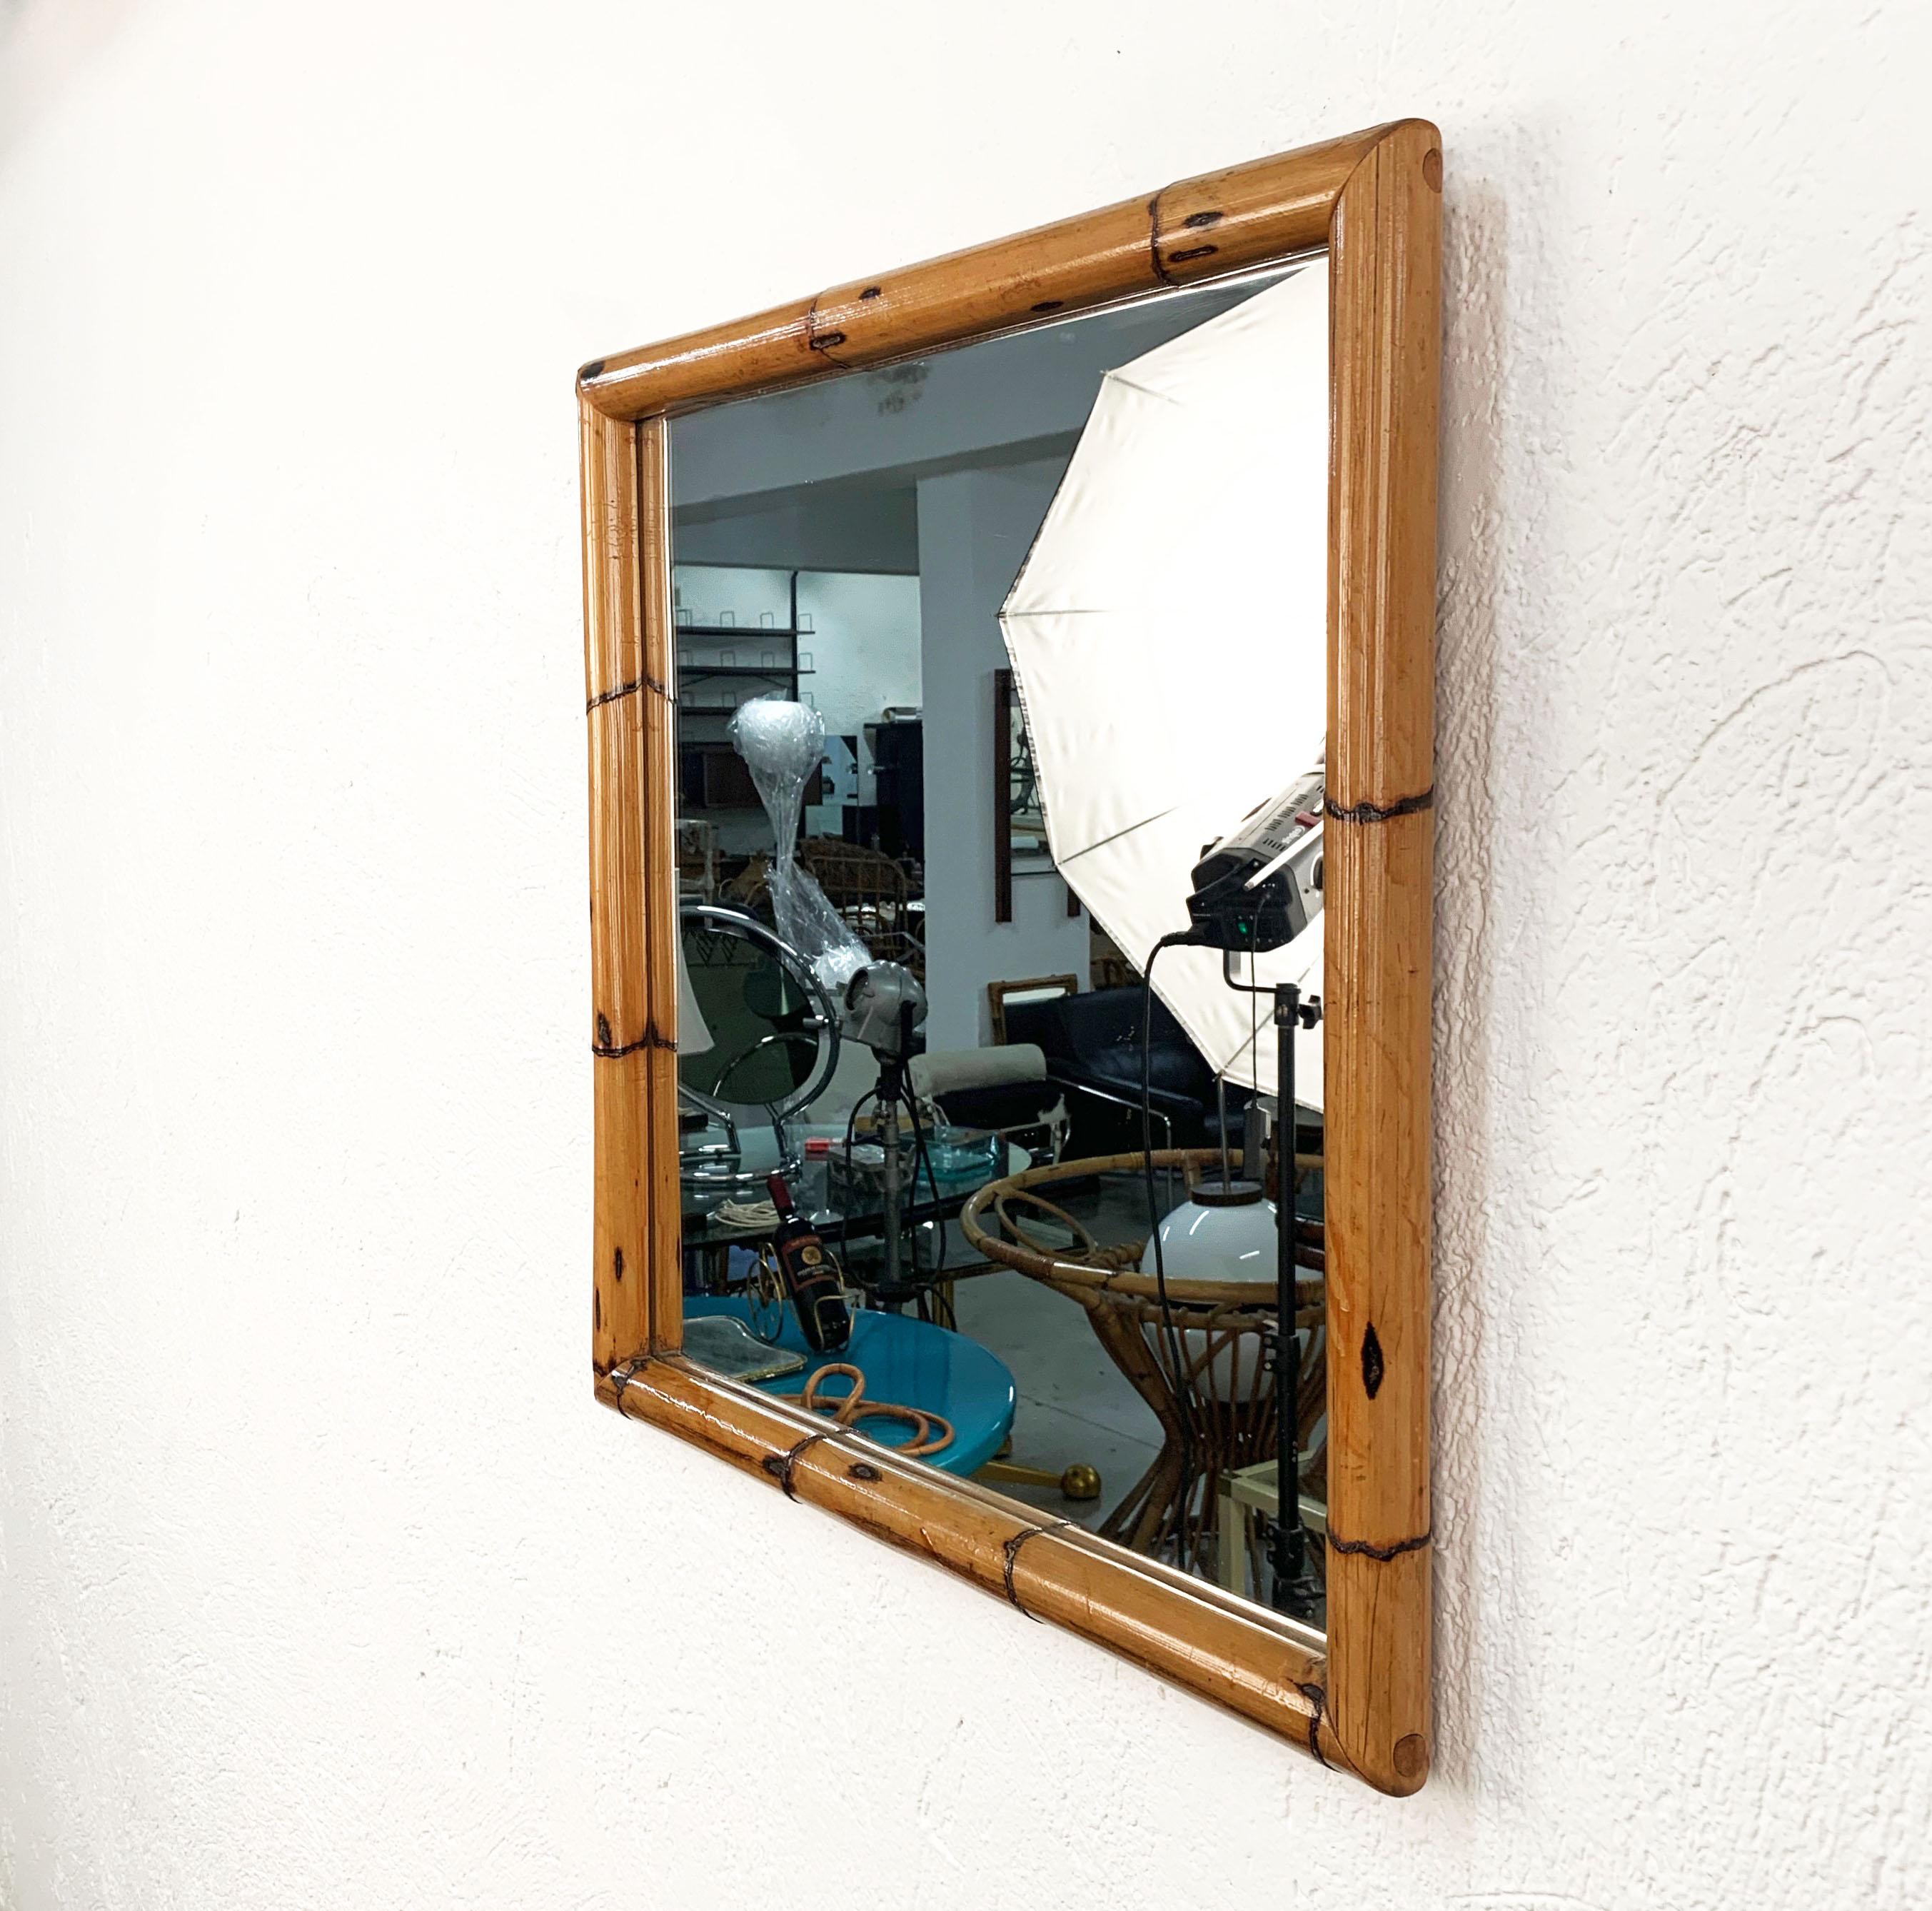 Midcentury square mirror, produced in Italy during the 1970s and attributed to Bonacina.

The way in which bamboo lines and glass integrate is fantastic and gives to this mirror an everlasting charm.

This item is perfect for a midcentury style